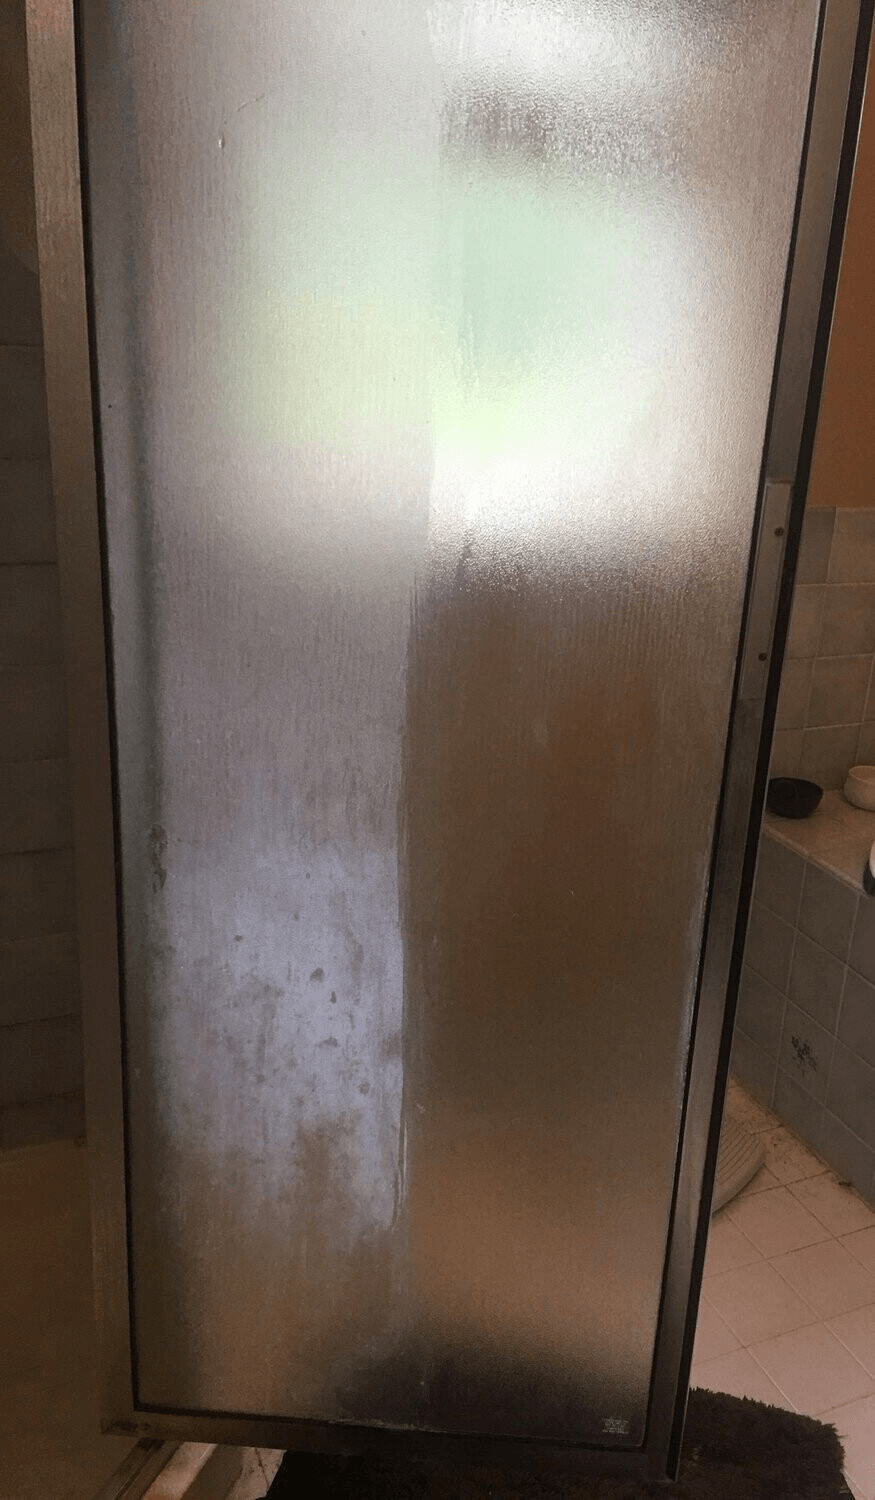 7 Ways You Can Clean Your Shower Door Tracks (Even Those With